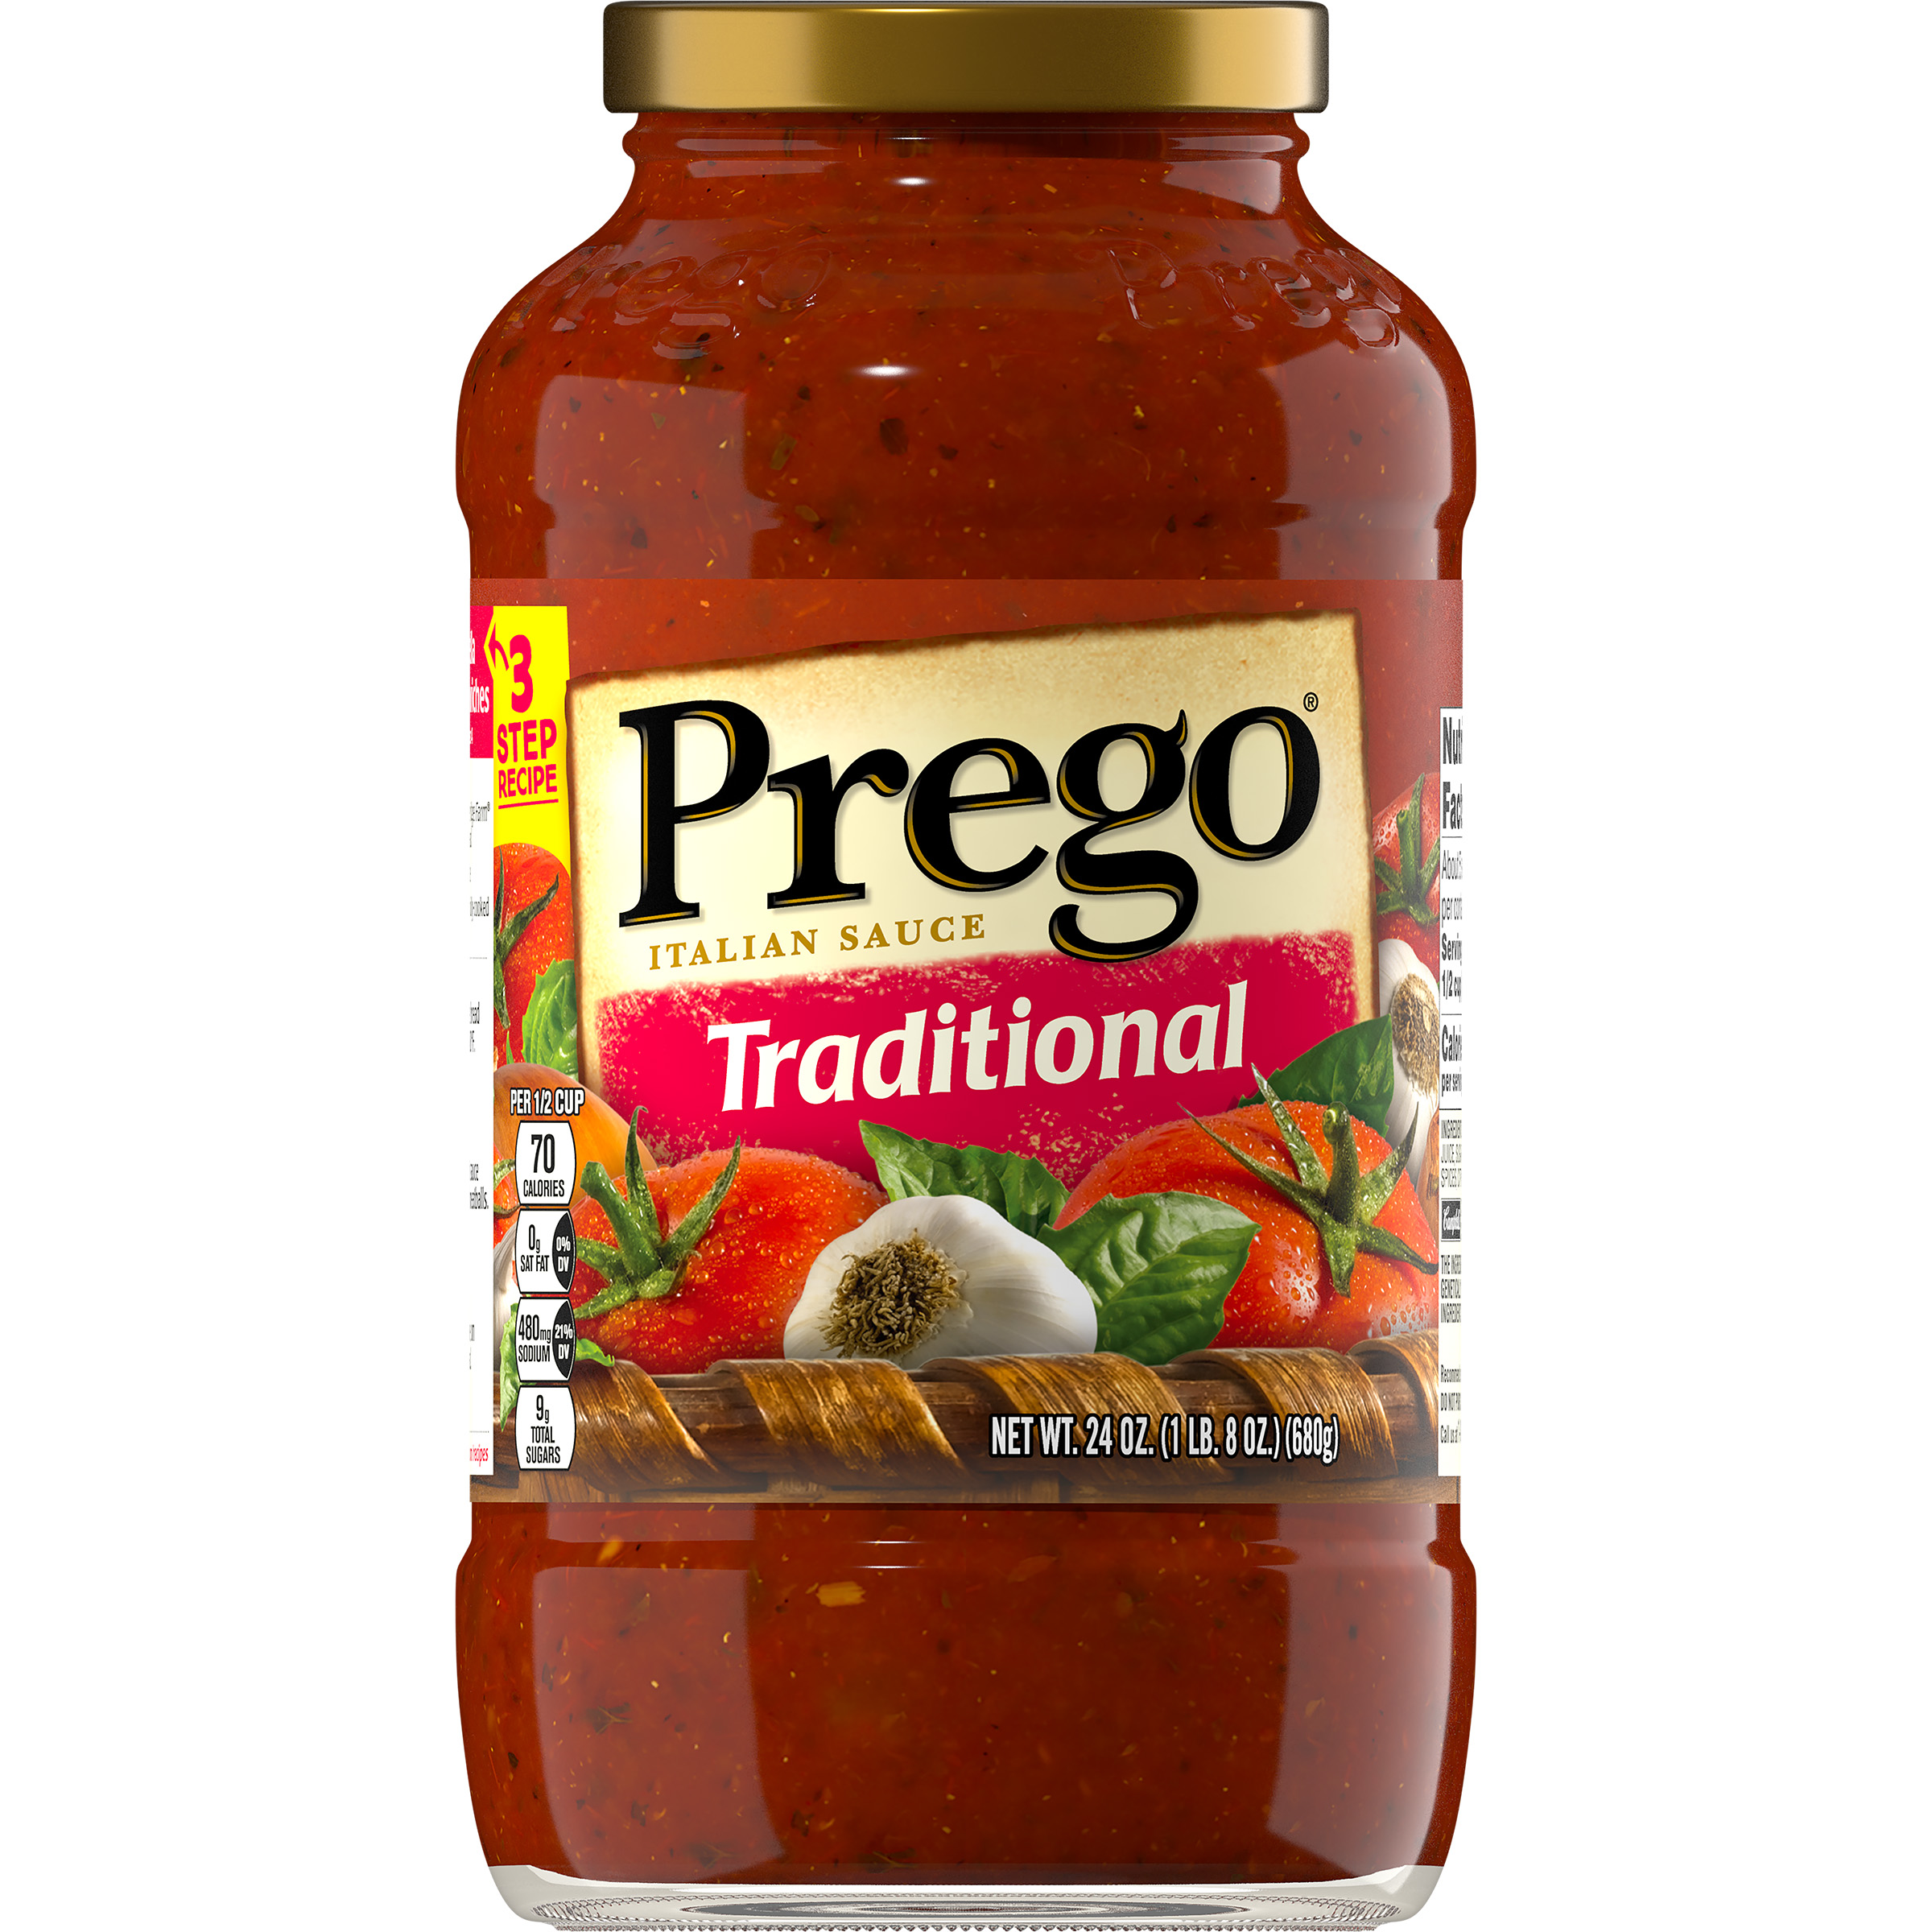 How To Make Spaghetti With Prego Sauce ...